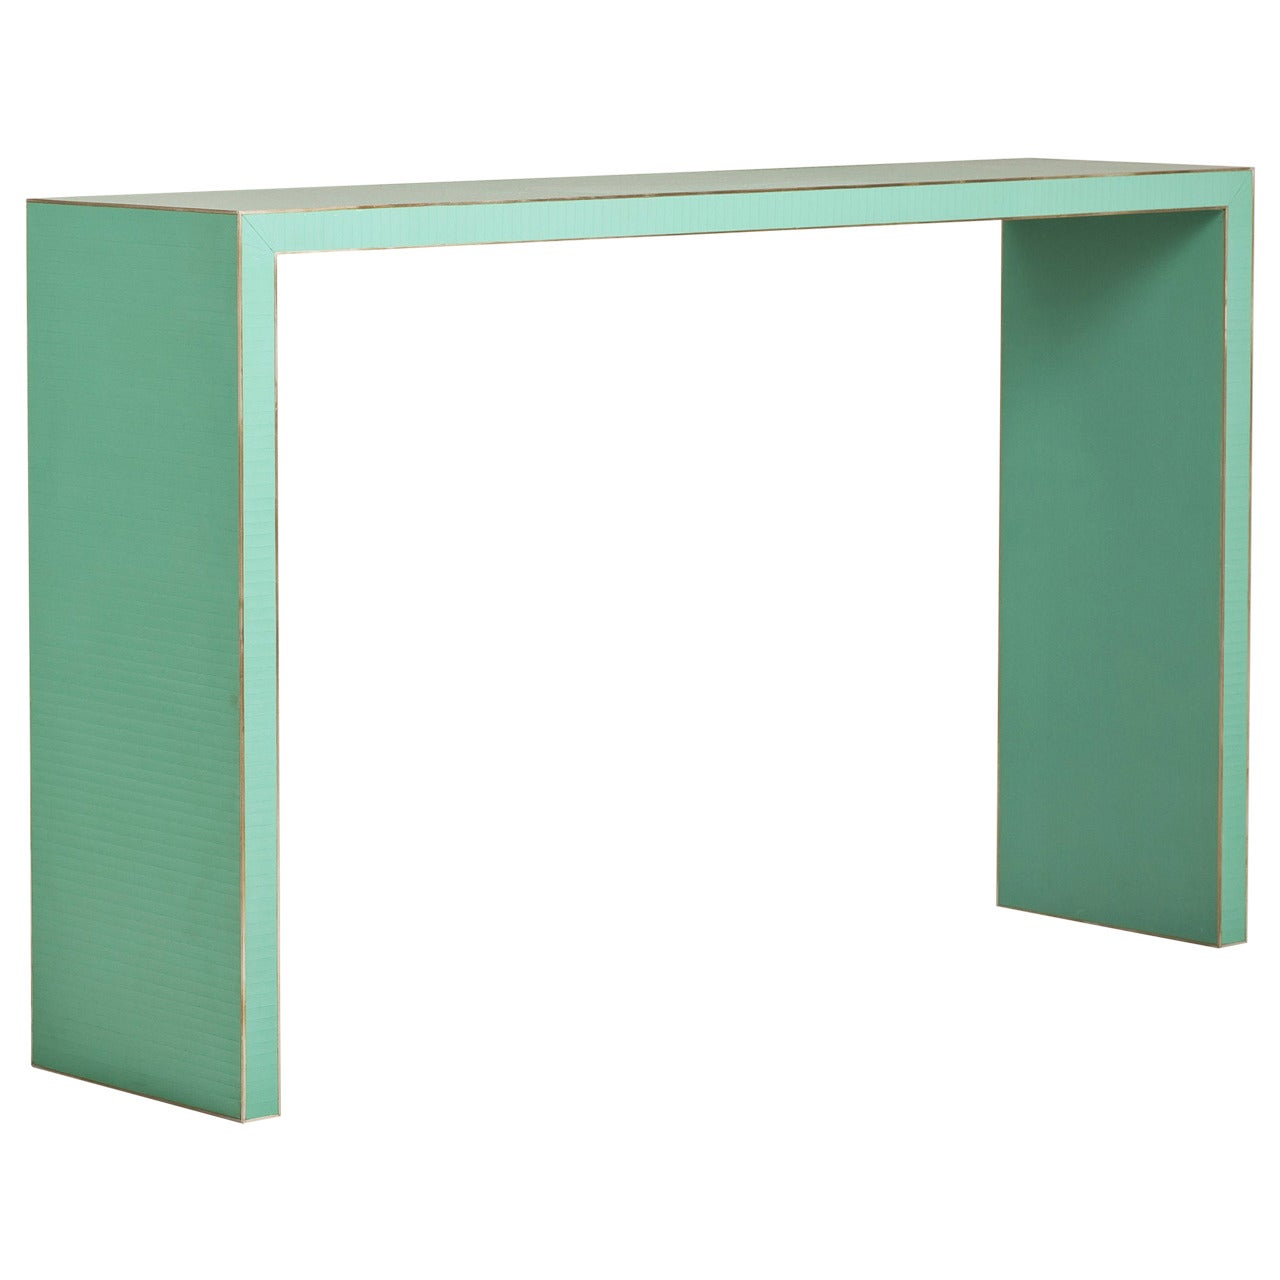 Chunky Seagreen Lacquered Console Table by Talisman